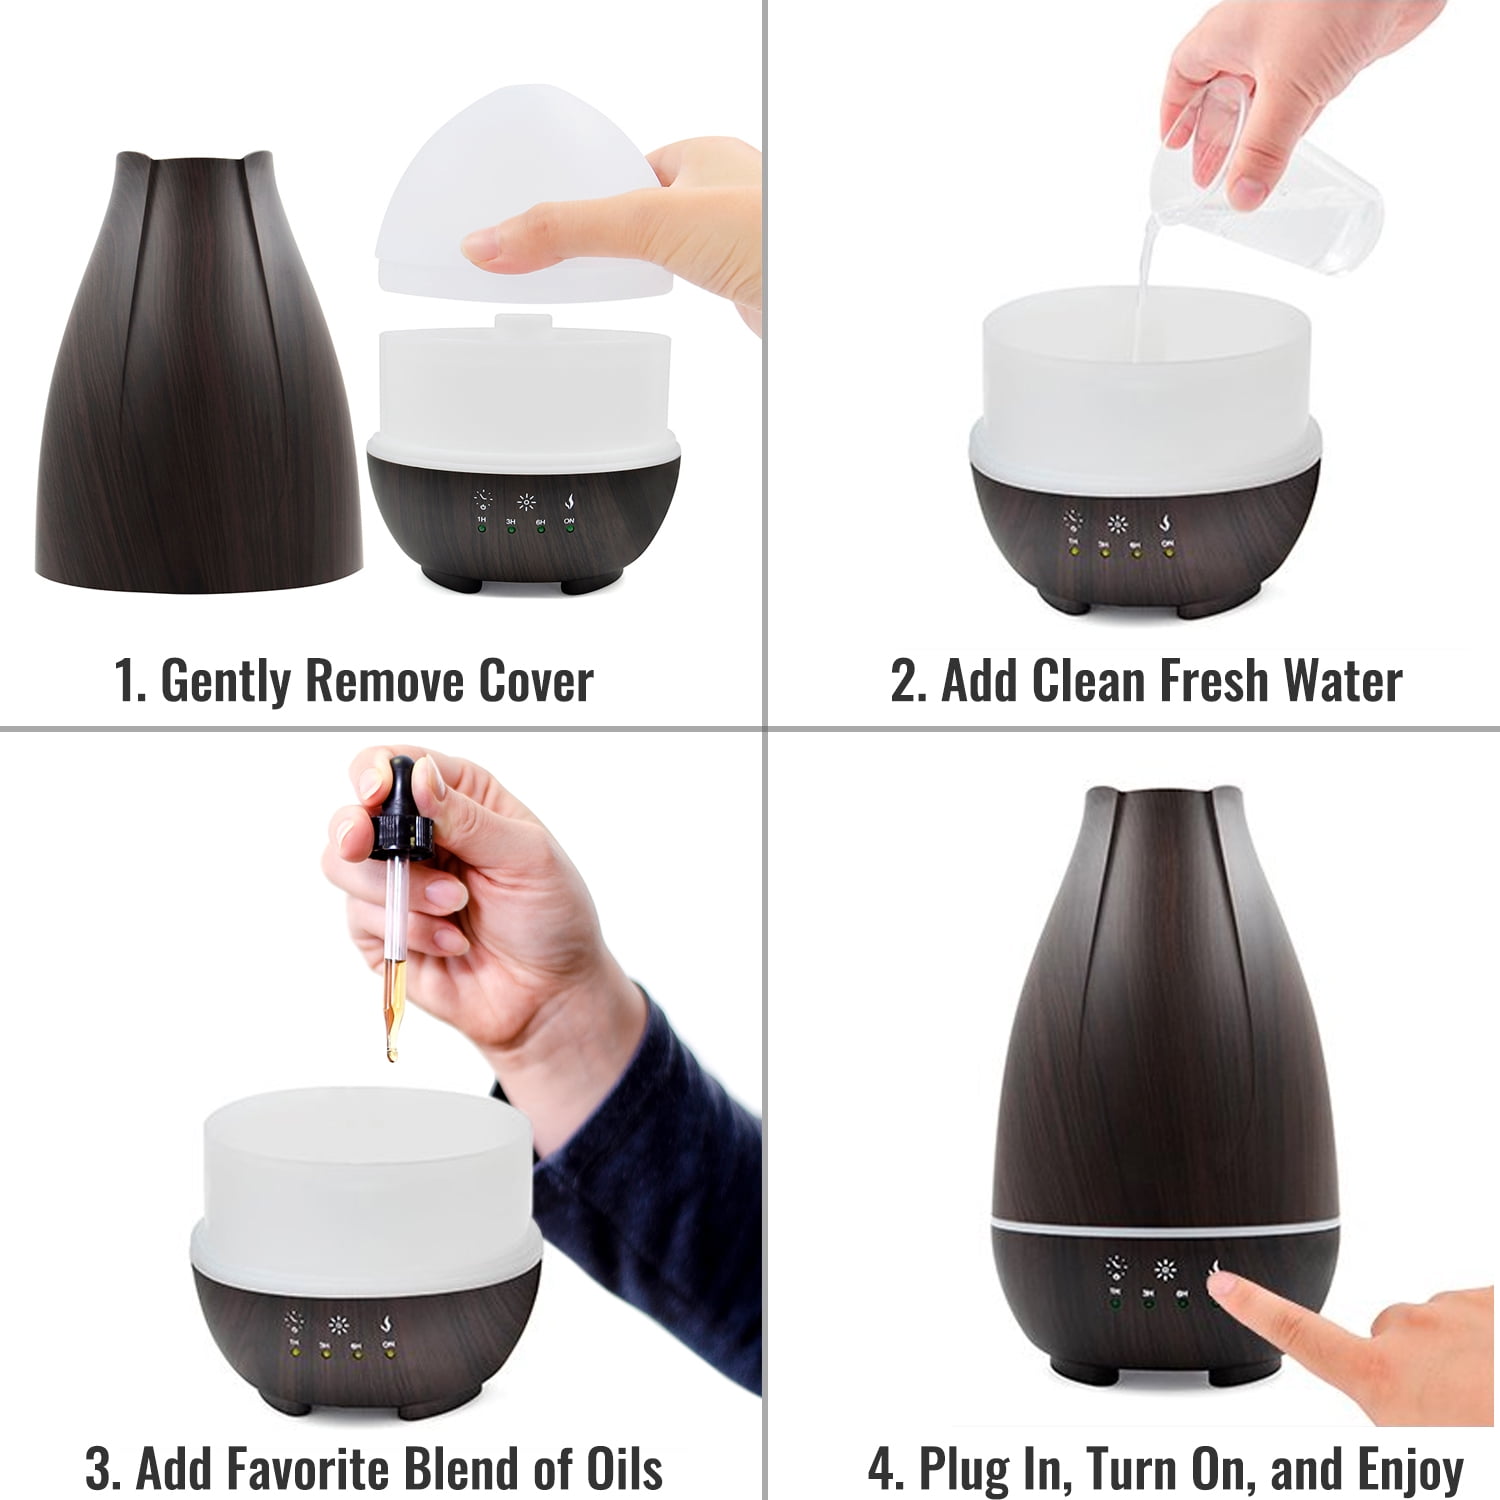 Air Diffuser Large Colorful Essential Oil Mist Ultrasonic Humidifier Aromatherap